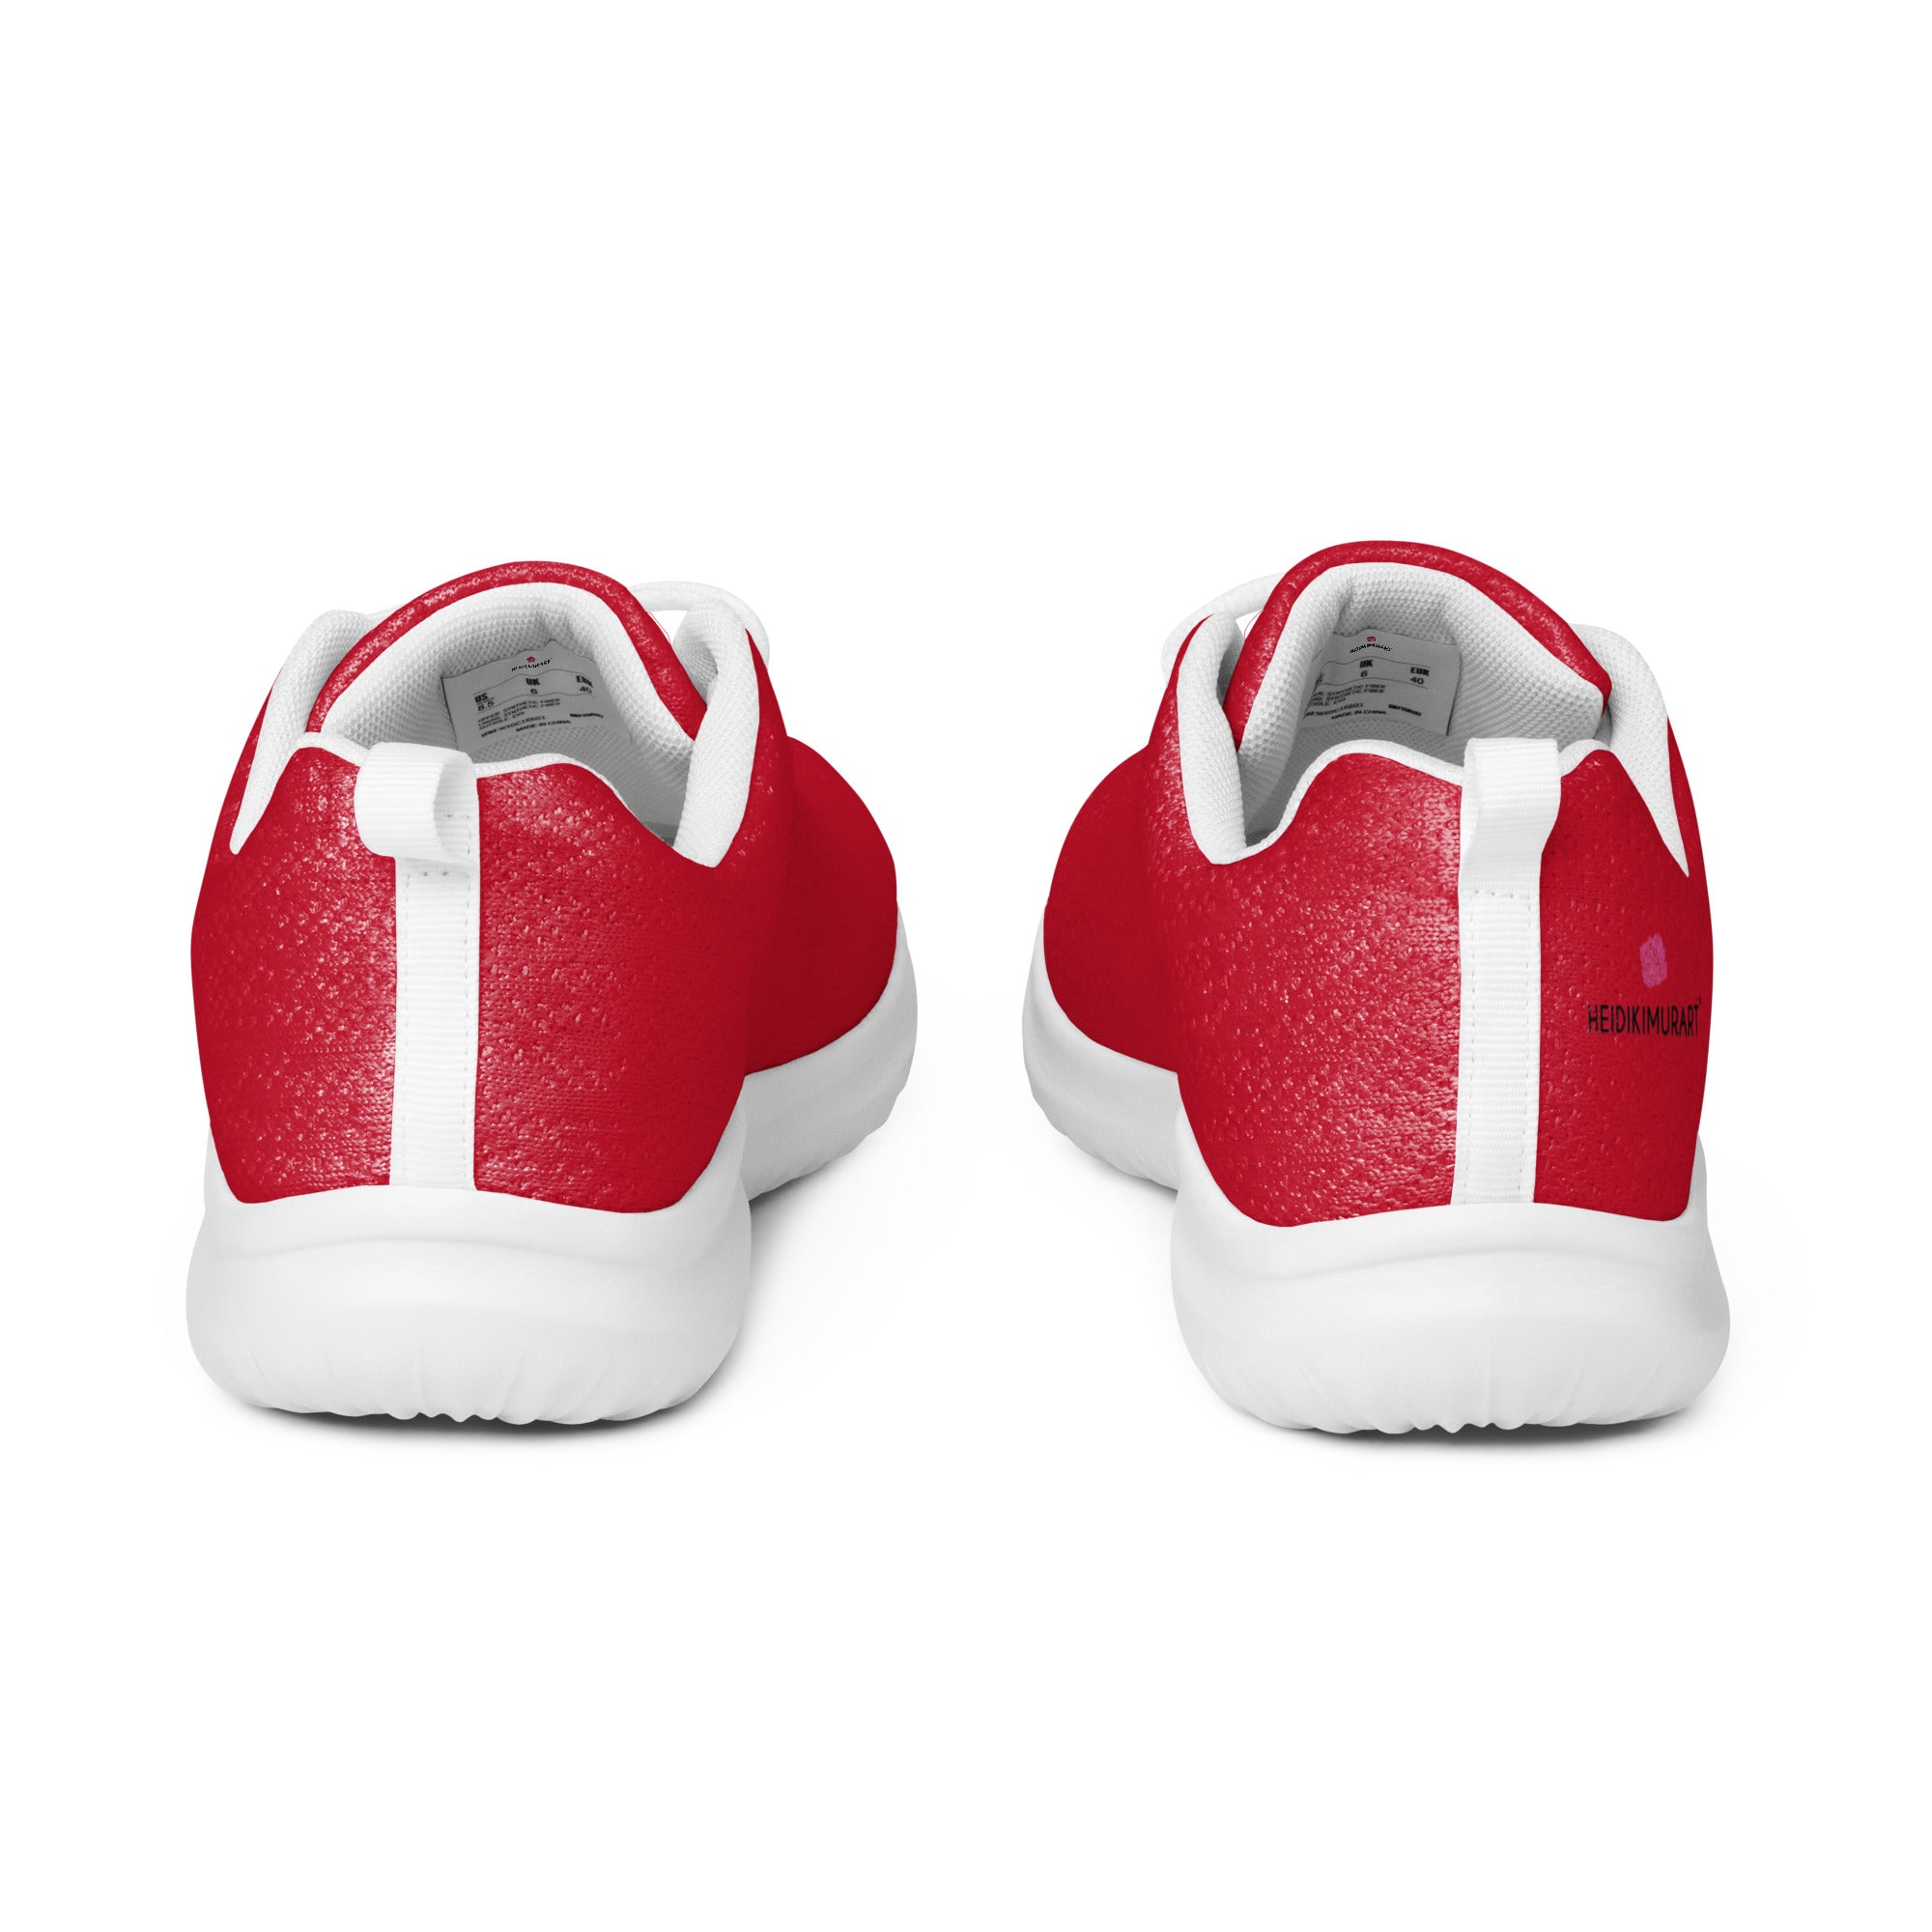 Bright Red Men’s Athletic Shoes, Solid Red Color Men's Sneakers, Solid Color Modern Breathable Lightweight Best Premium Designer Men’s Lace-up Low Top Sneakers, Modern Essential Classic Every Day Best Quality Fashionable Running Casual Breathable Comfortable Running Shoes With White Laces and Padded Tongues and Thick Outsoles (US Size: 5-13)